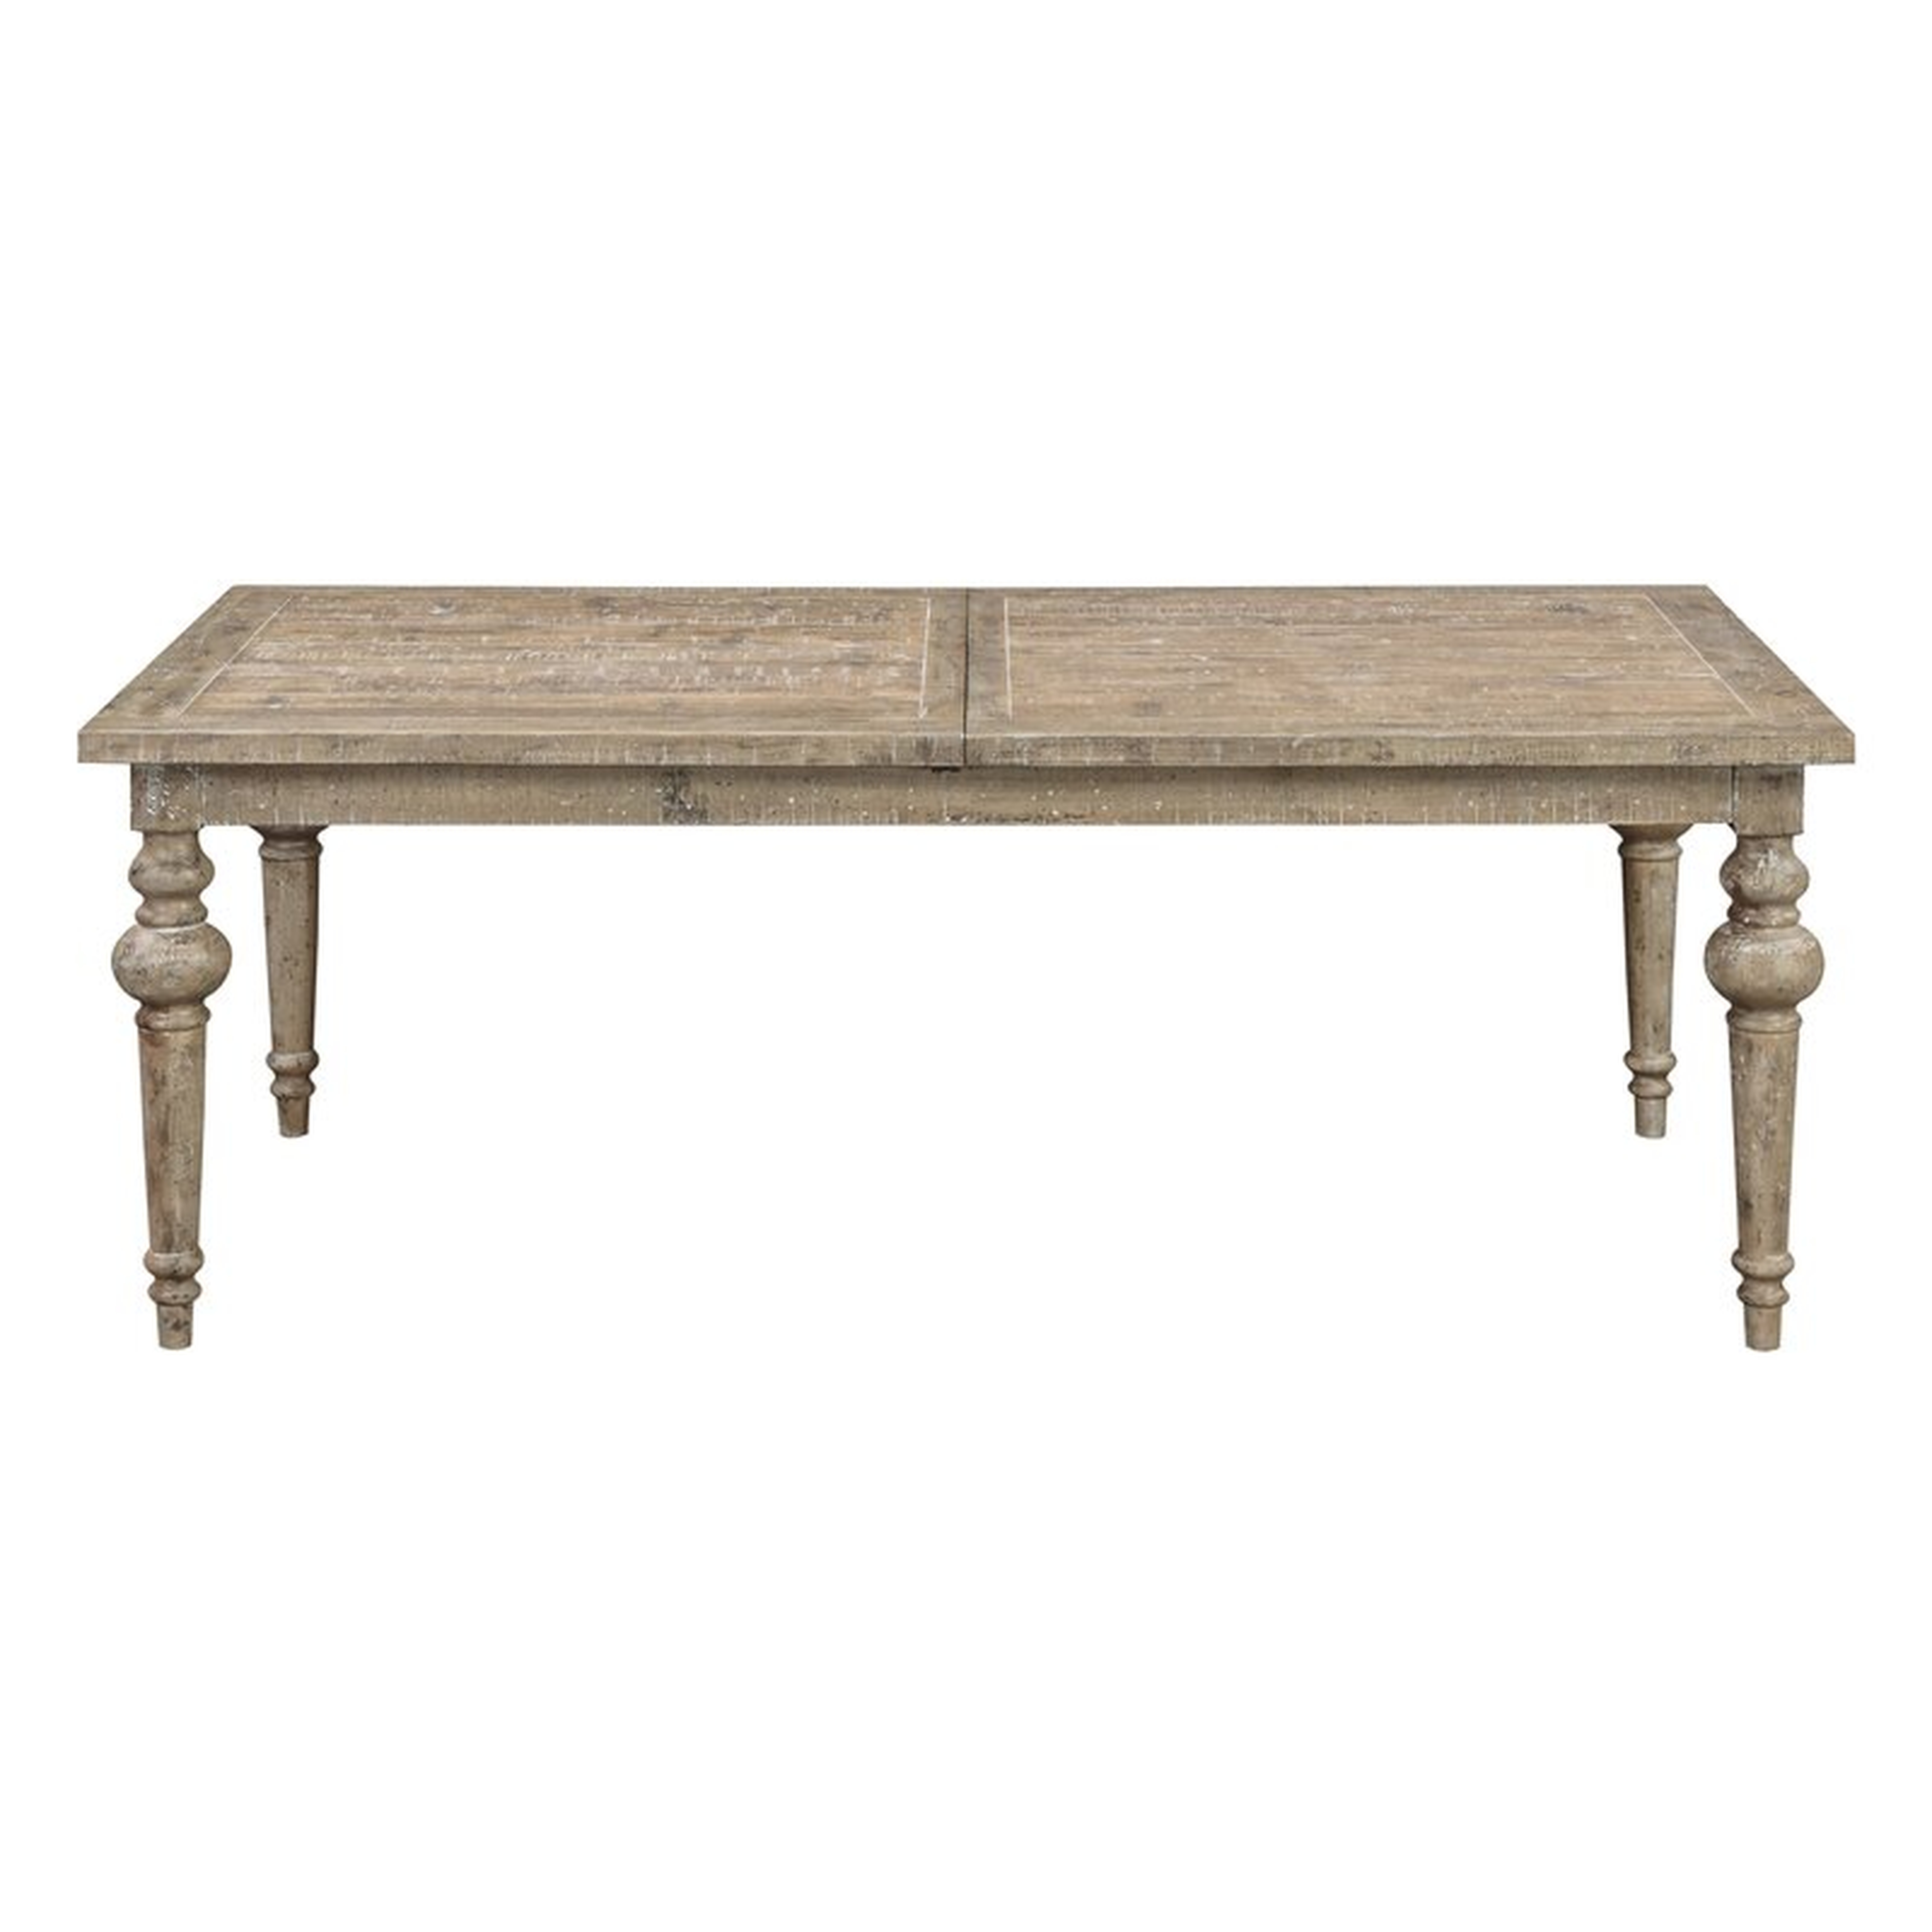 Clintwood Butterfly Leaf Dining Table - Wayfair